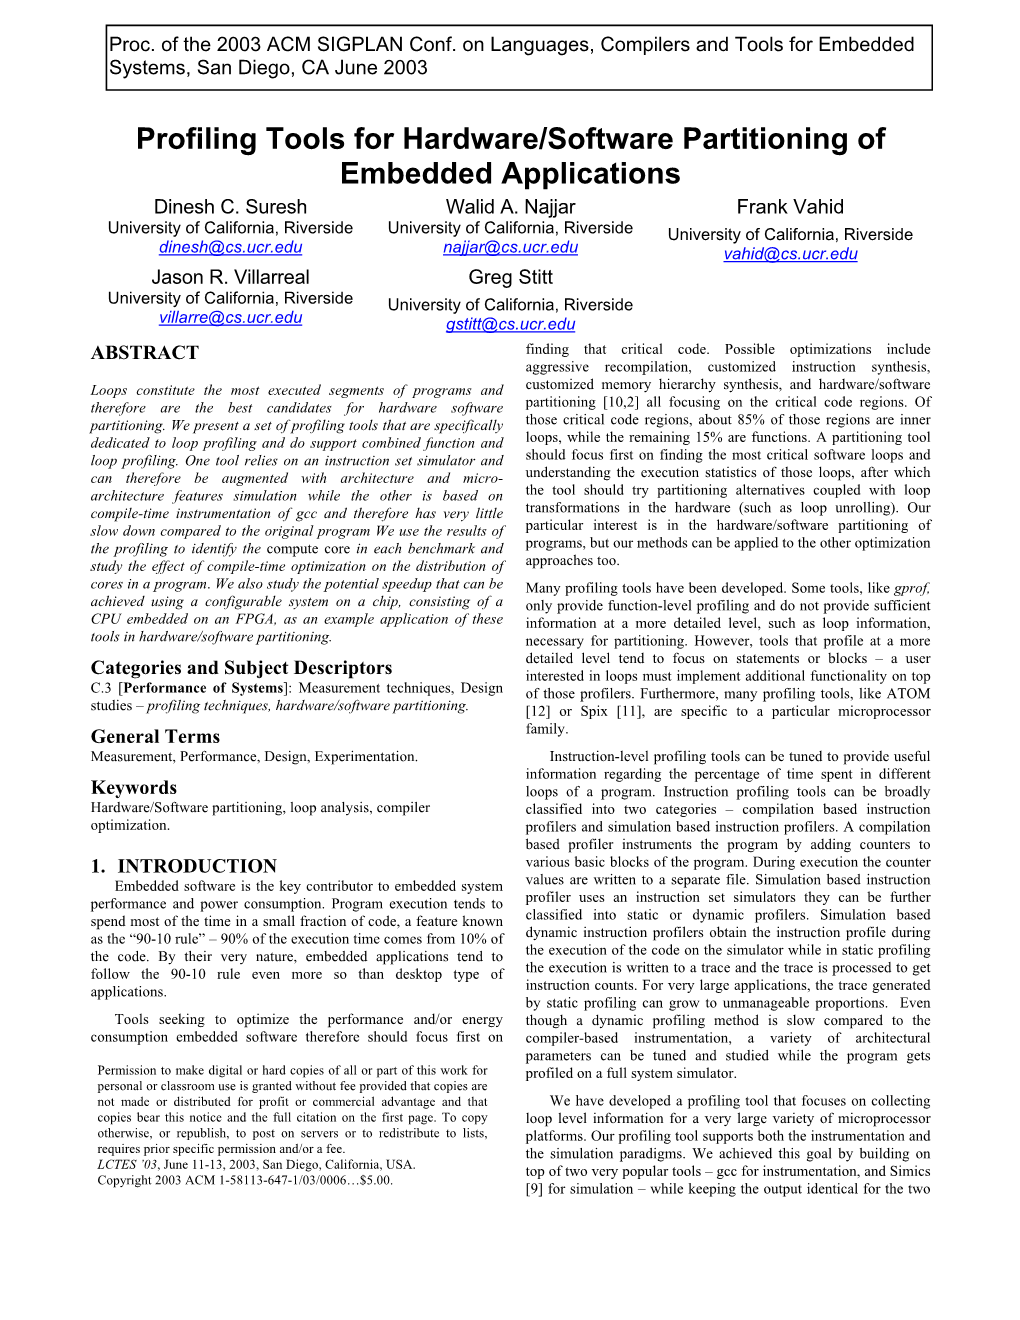 Profiling Tools for Hardware/Software Partitioning of Embedded Applications Dinesh C